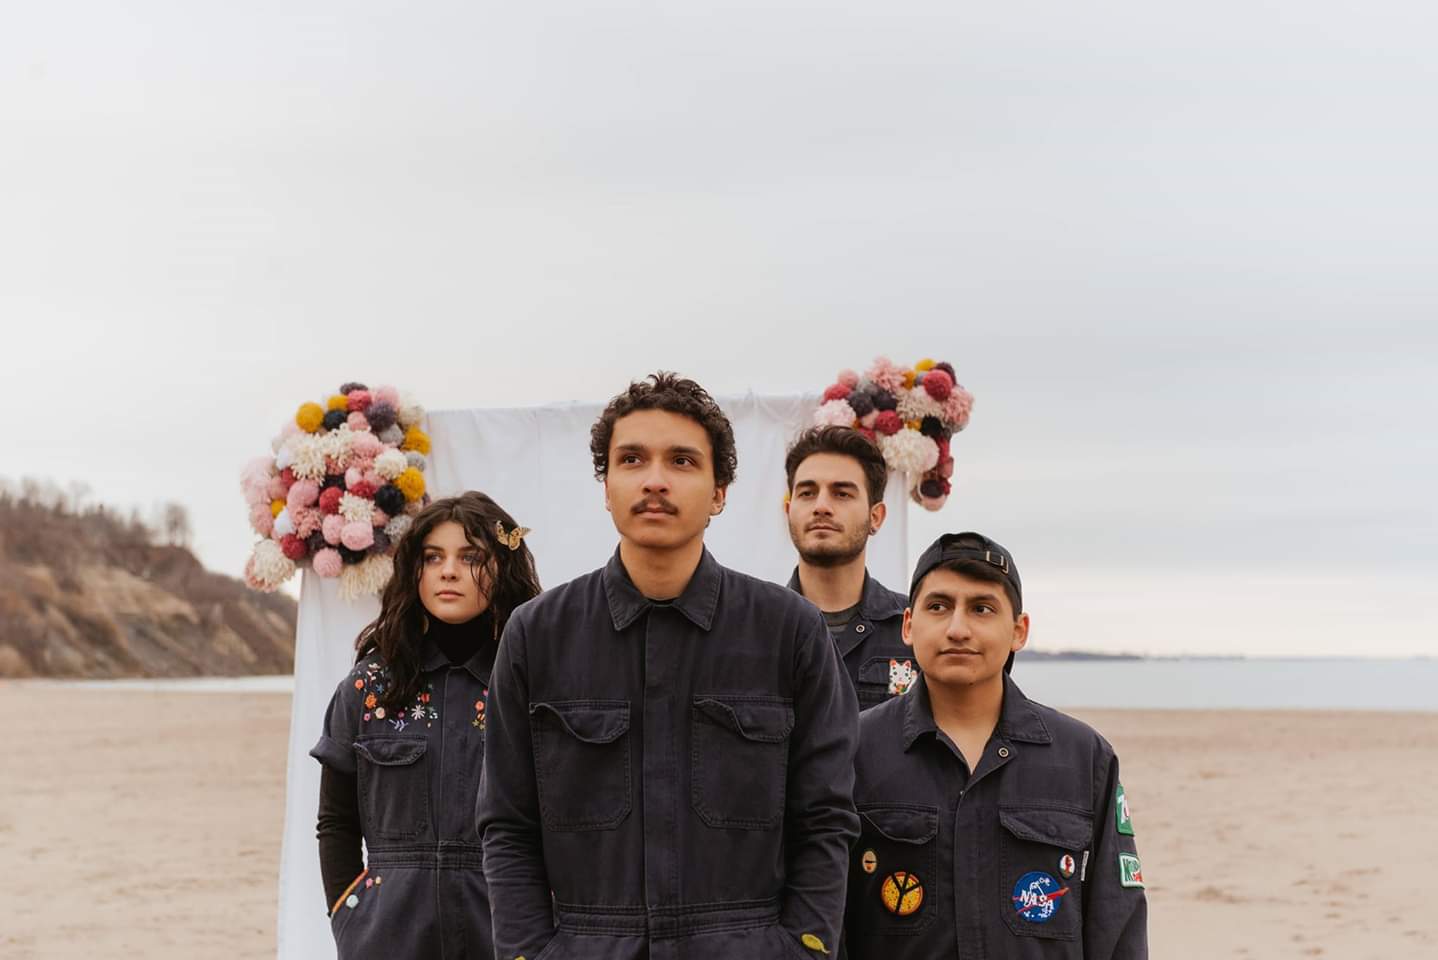 Four young men and one woman standing together in black jumpsuits on a sandy beach. There is a white archway in the background with pink flowers on it.